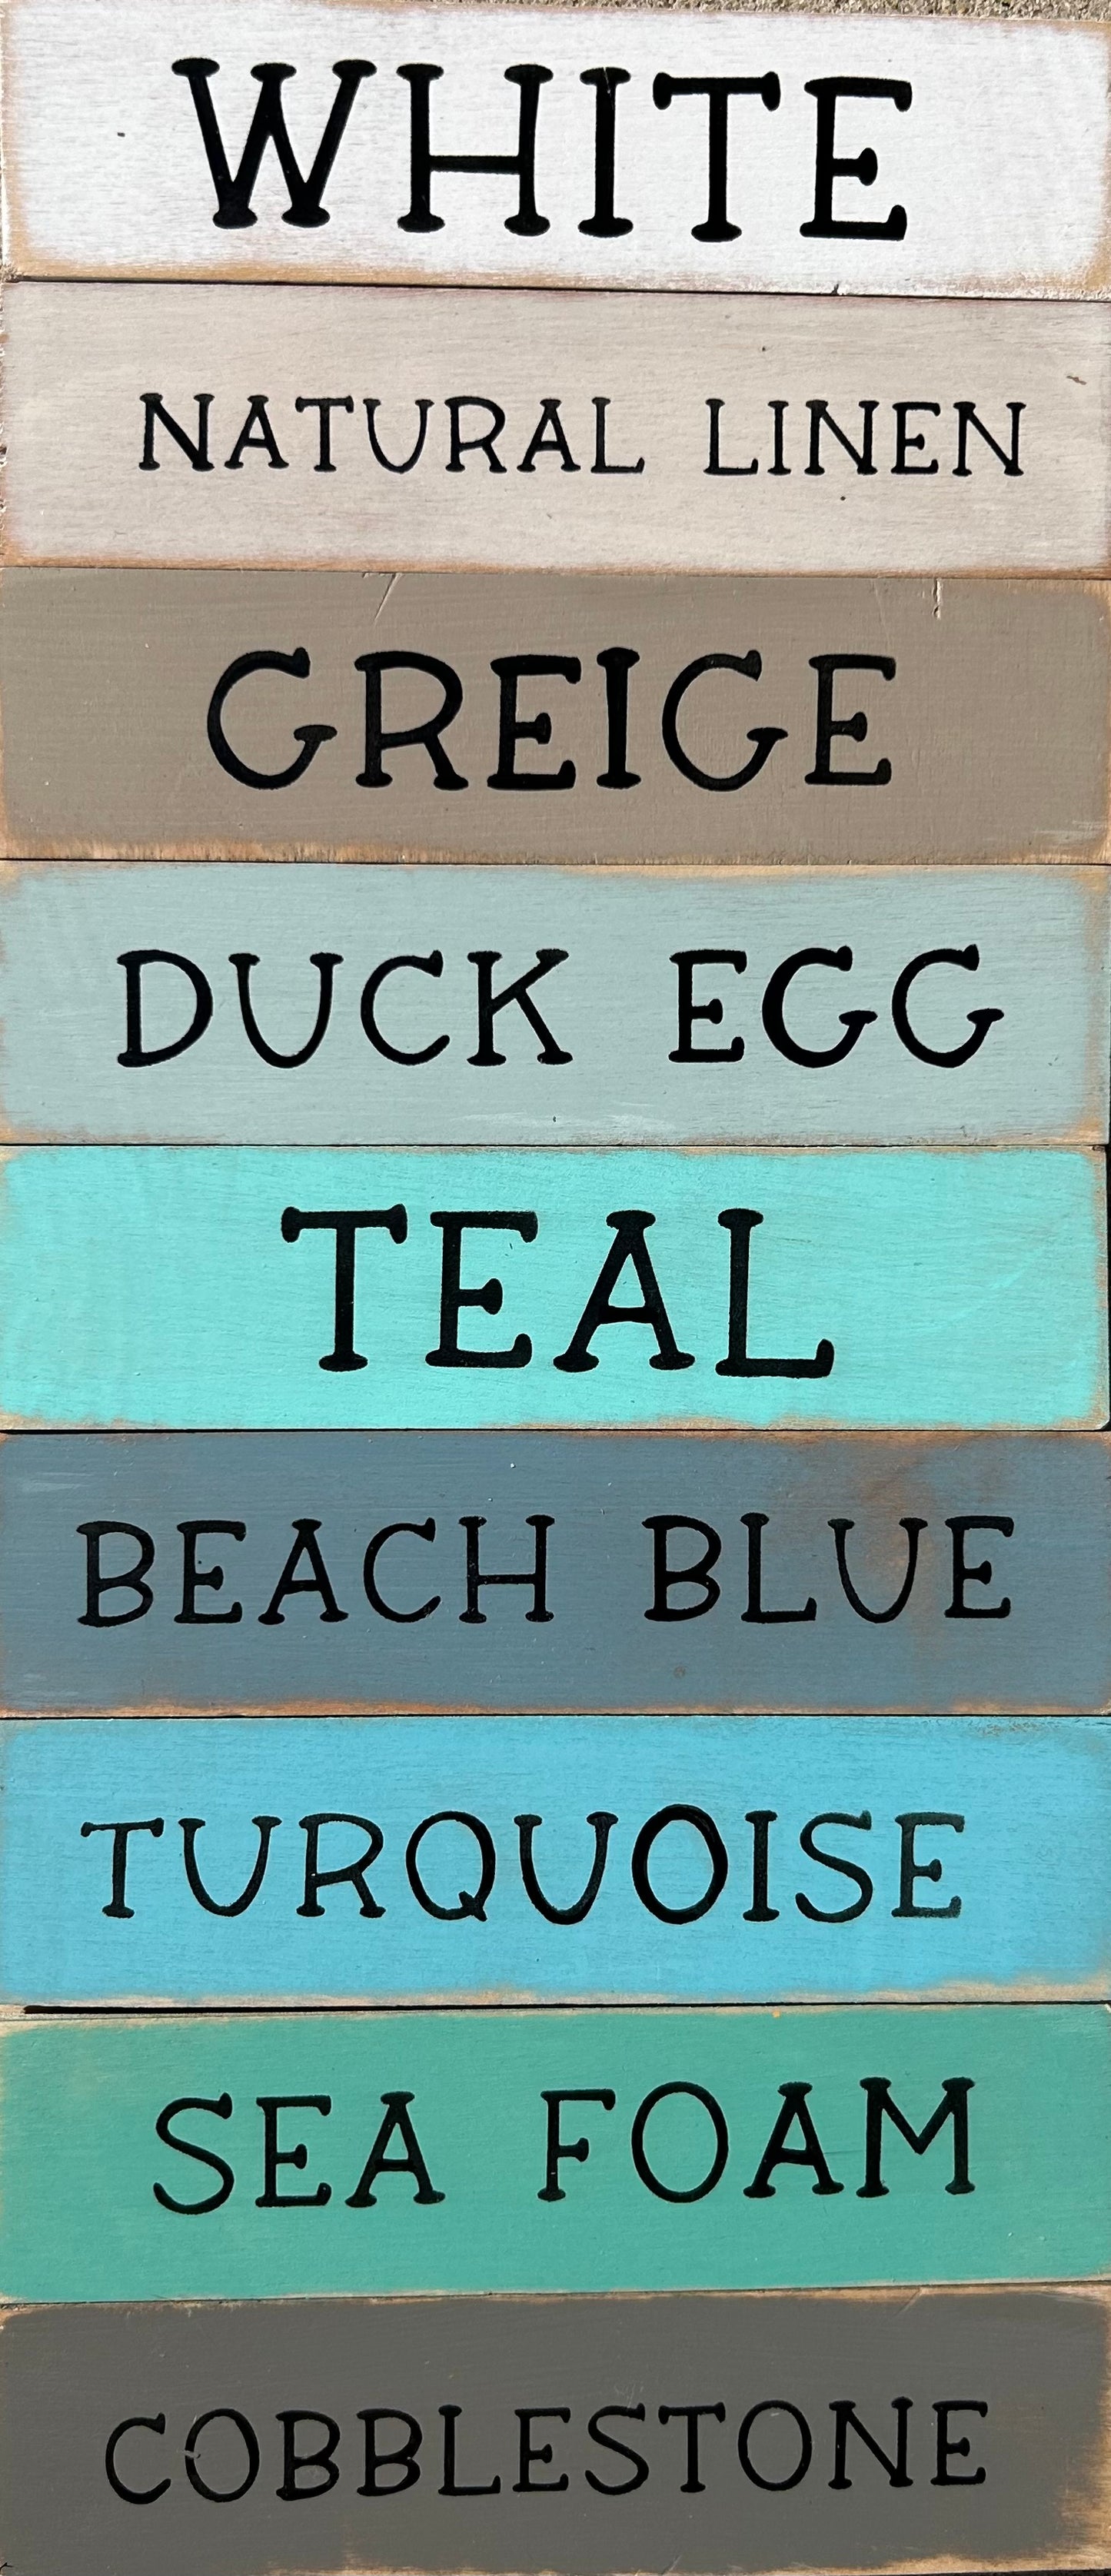 Selective Participation - Rustic Funny Wood Sign